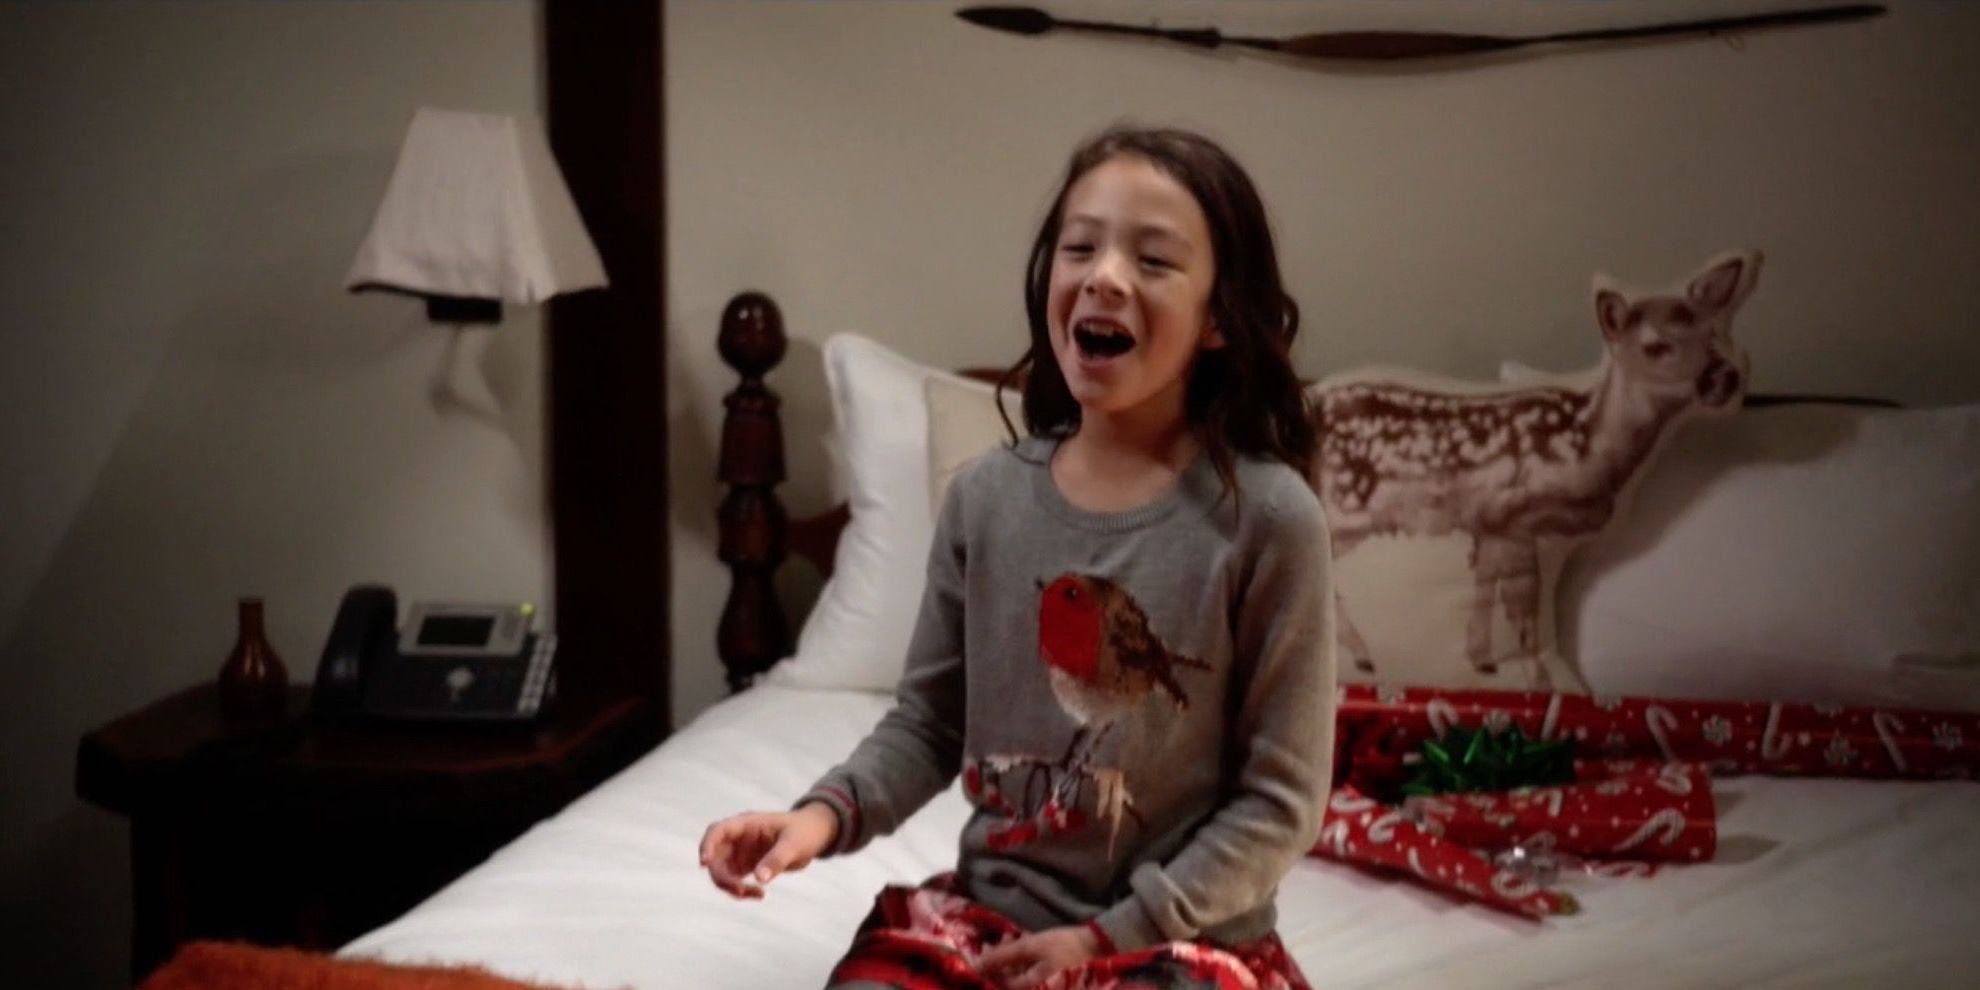 Lily kneeling on the bed and smiling in Modern Family